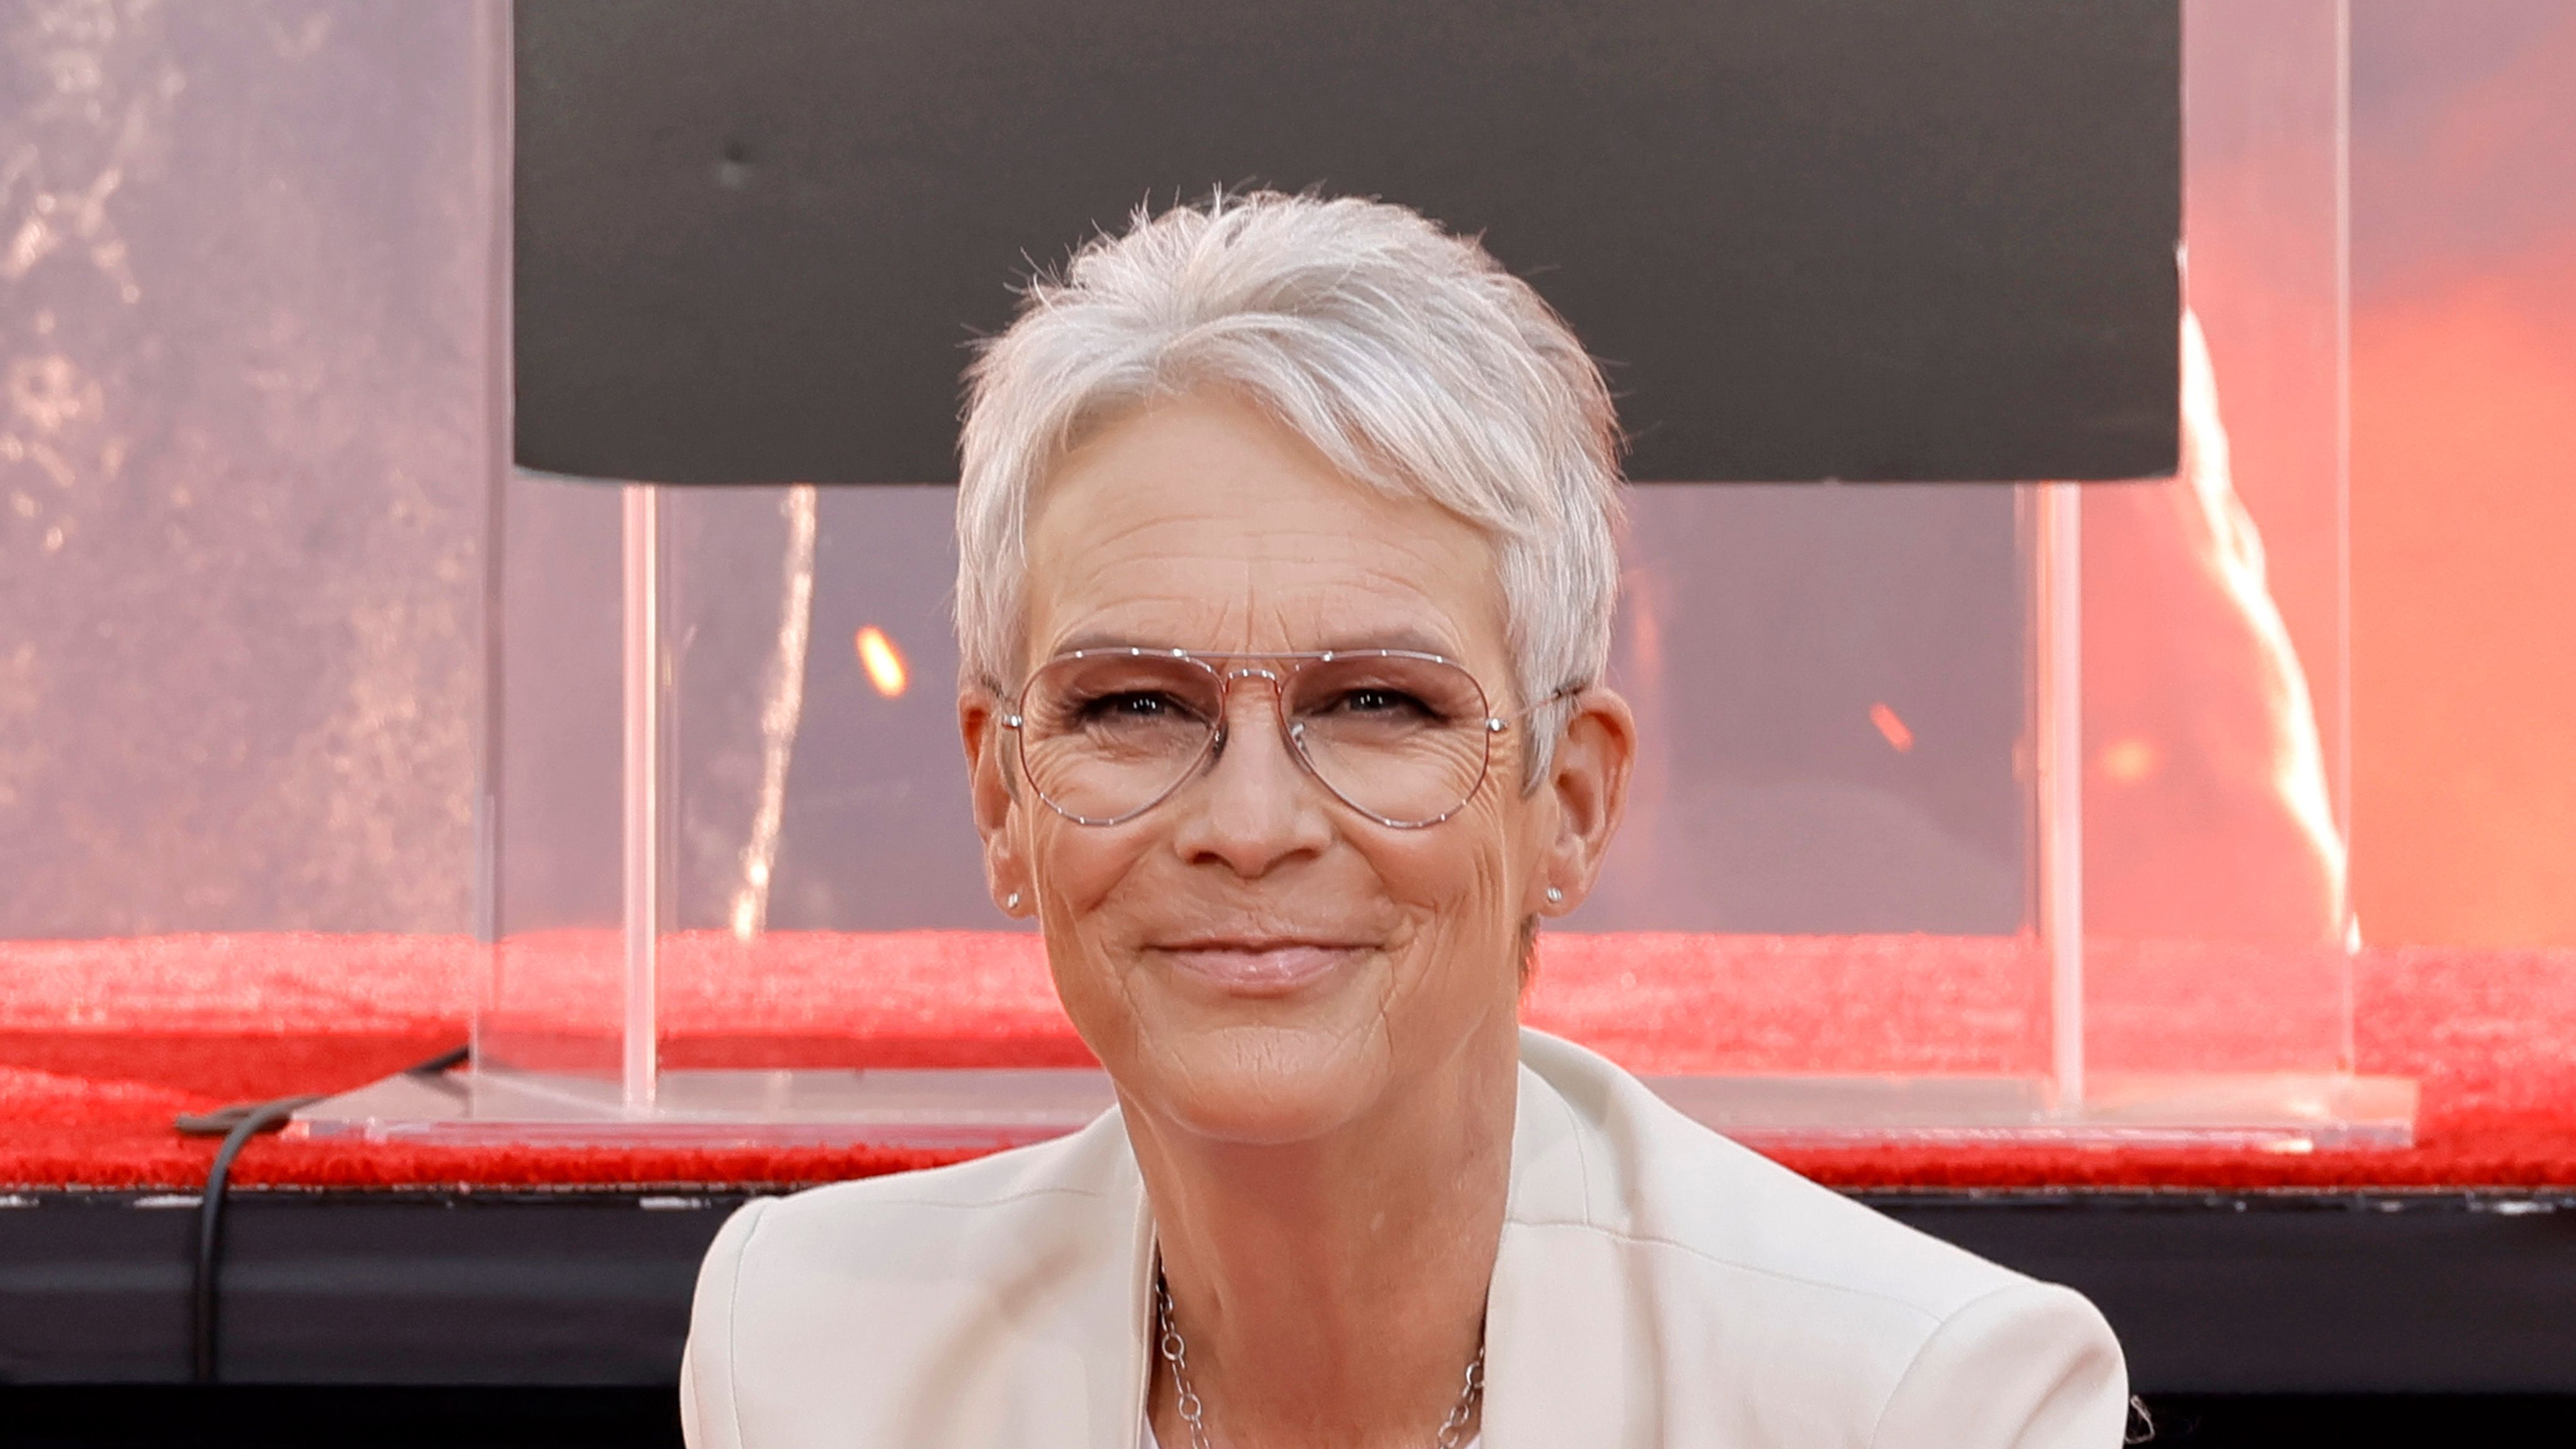 chebar smith recommends jamie lee curtis boobs pic